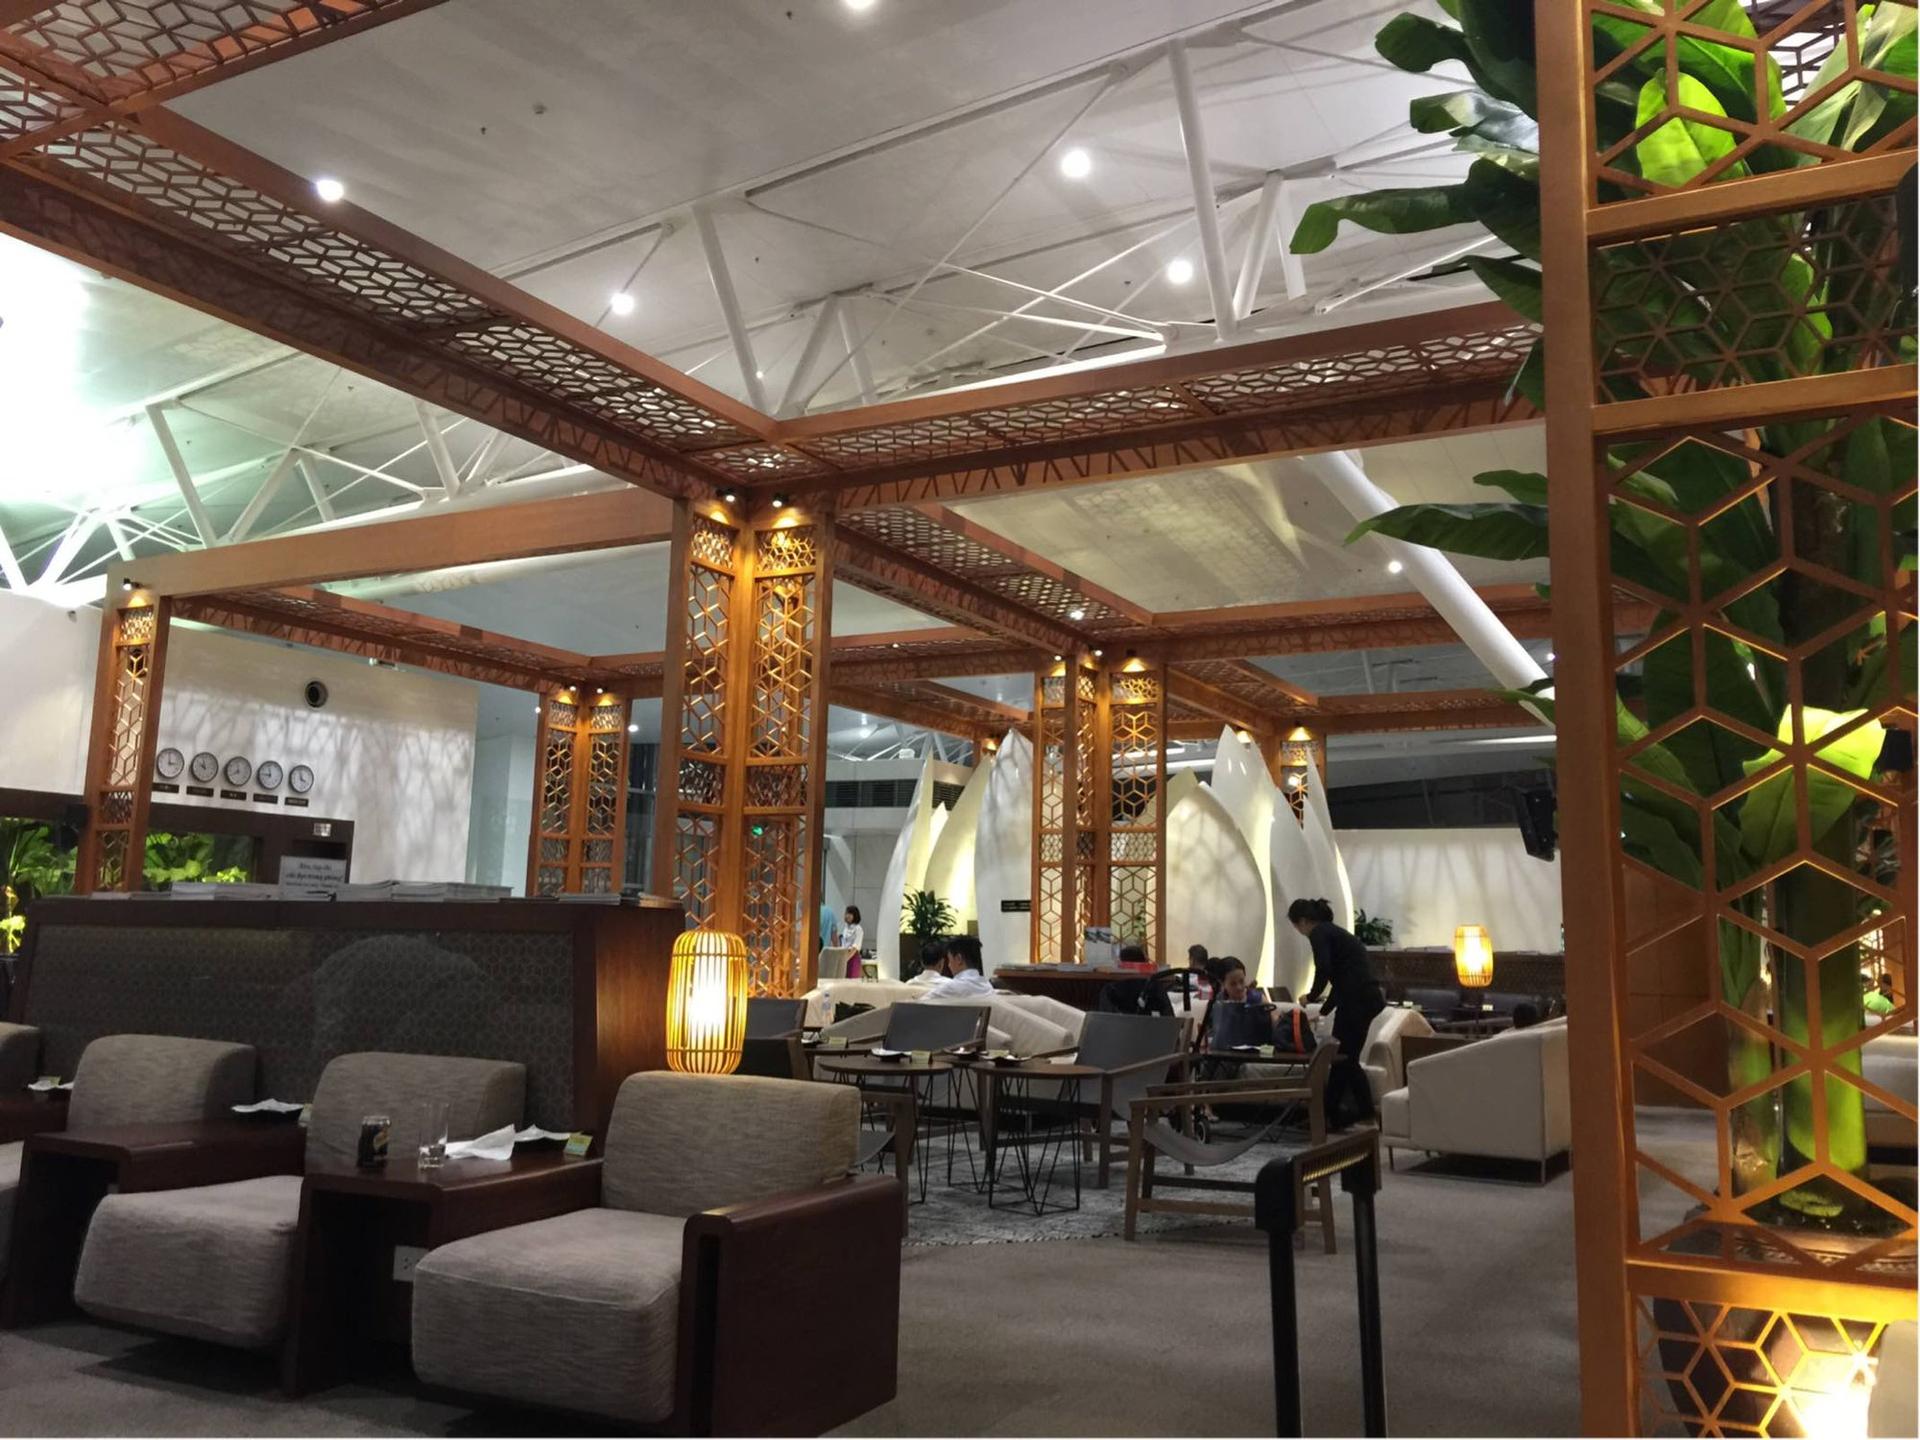 Vietnam Airlines Business Class Lounge image 1 of 16